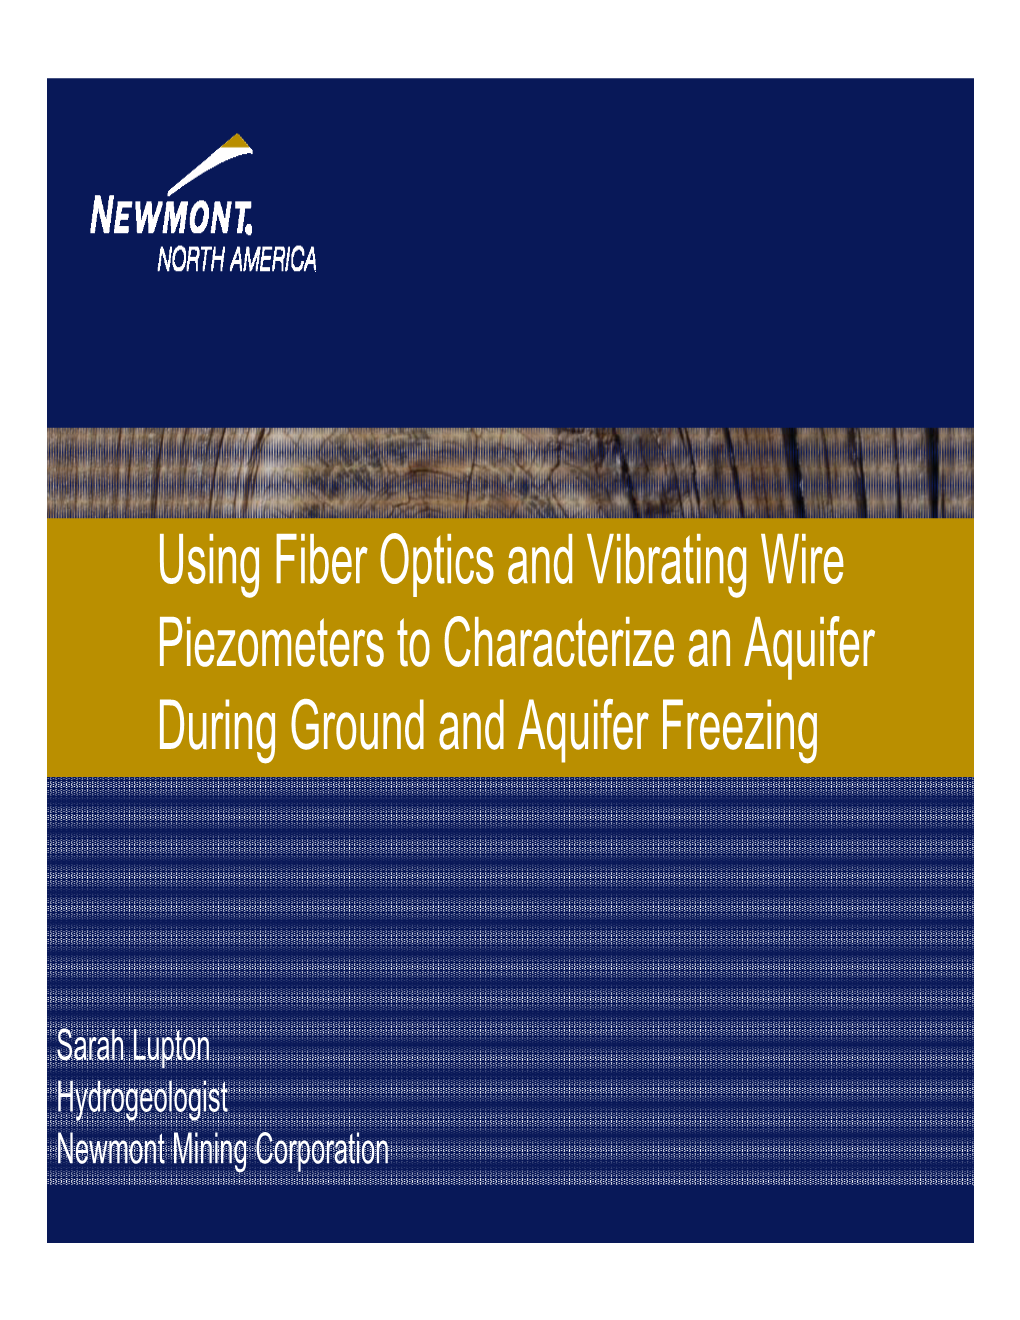 Using Fiber Optics and Vibrating Wire Piezometers to Characterize an Aquifer During Ground and Aquifer Freezing